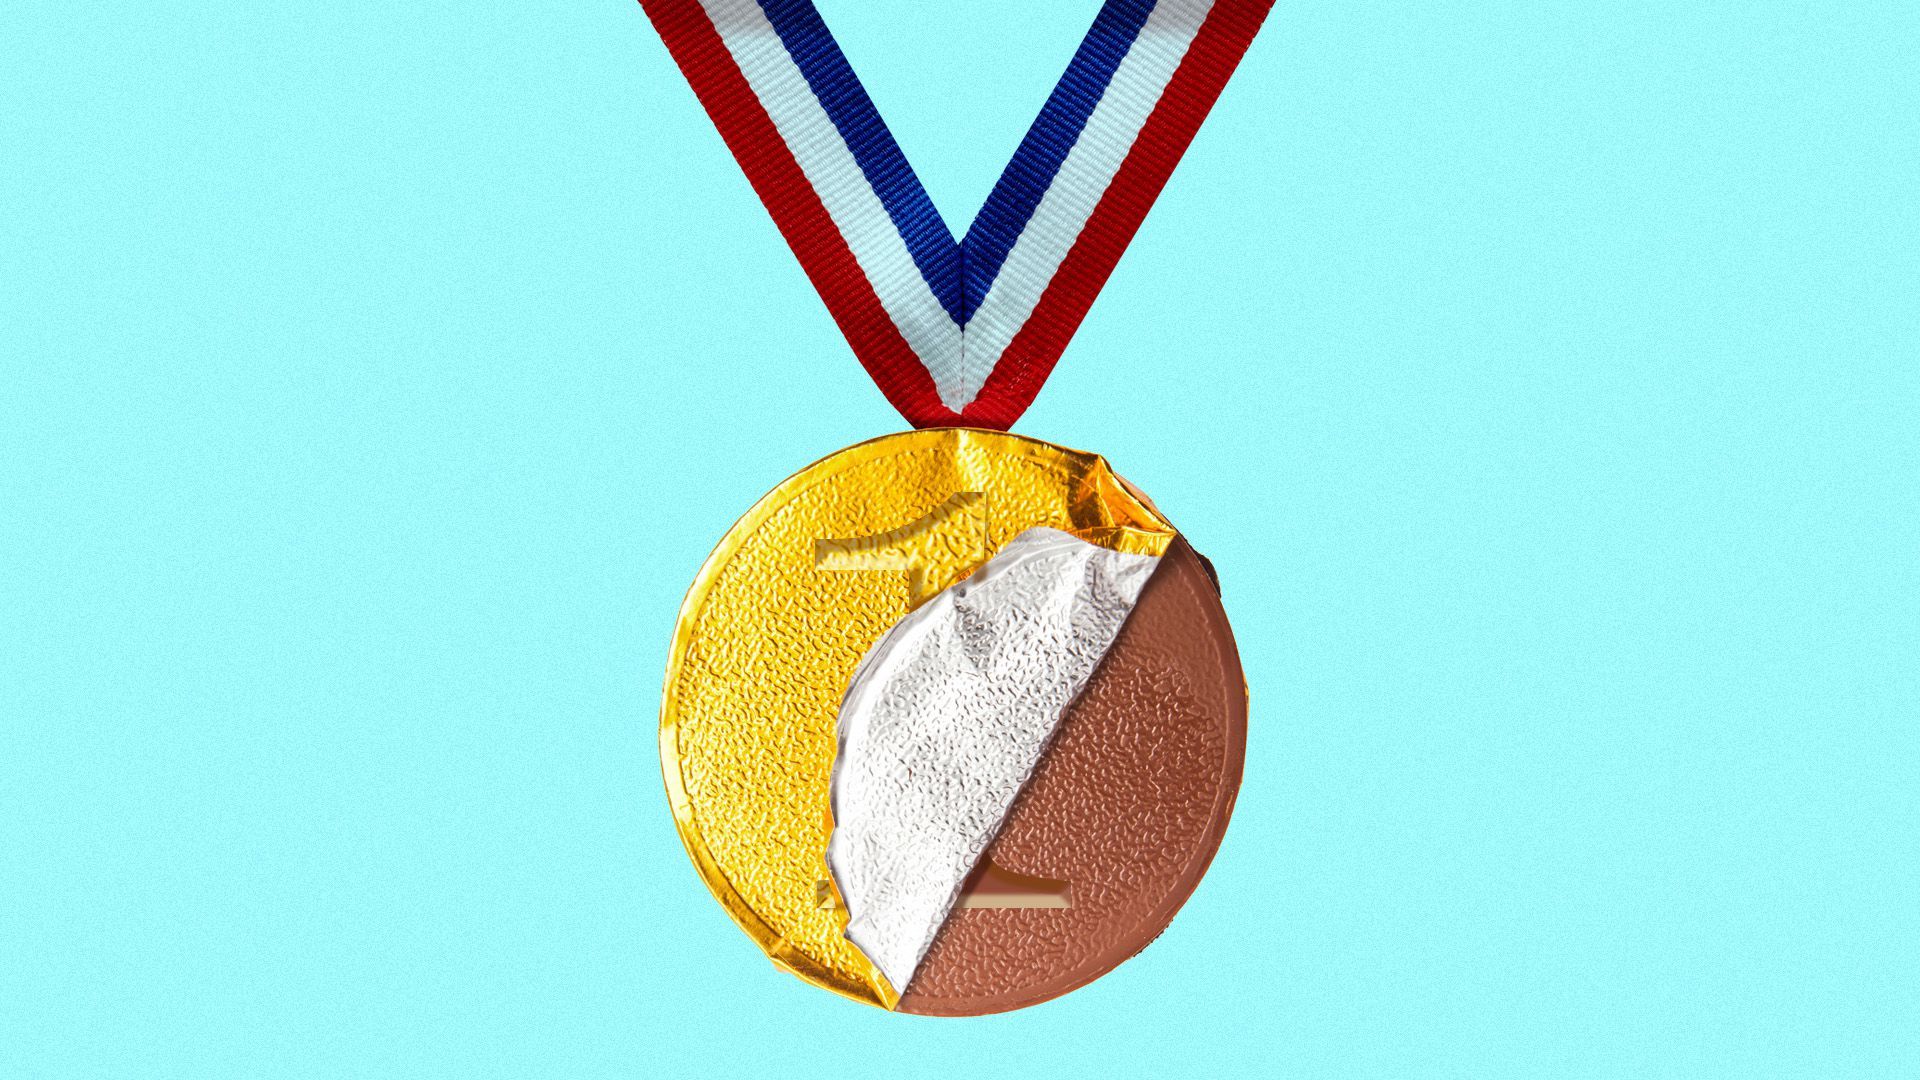 Illustration of a gold medal made out of chocolate 